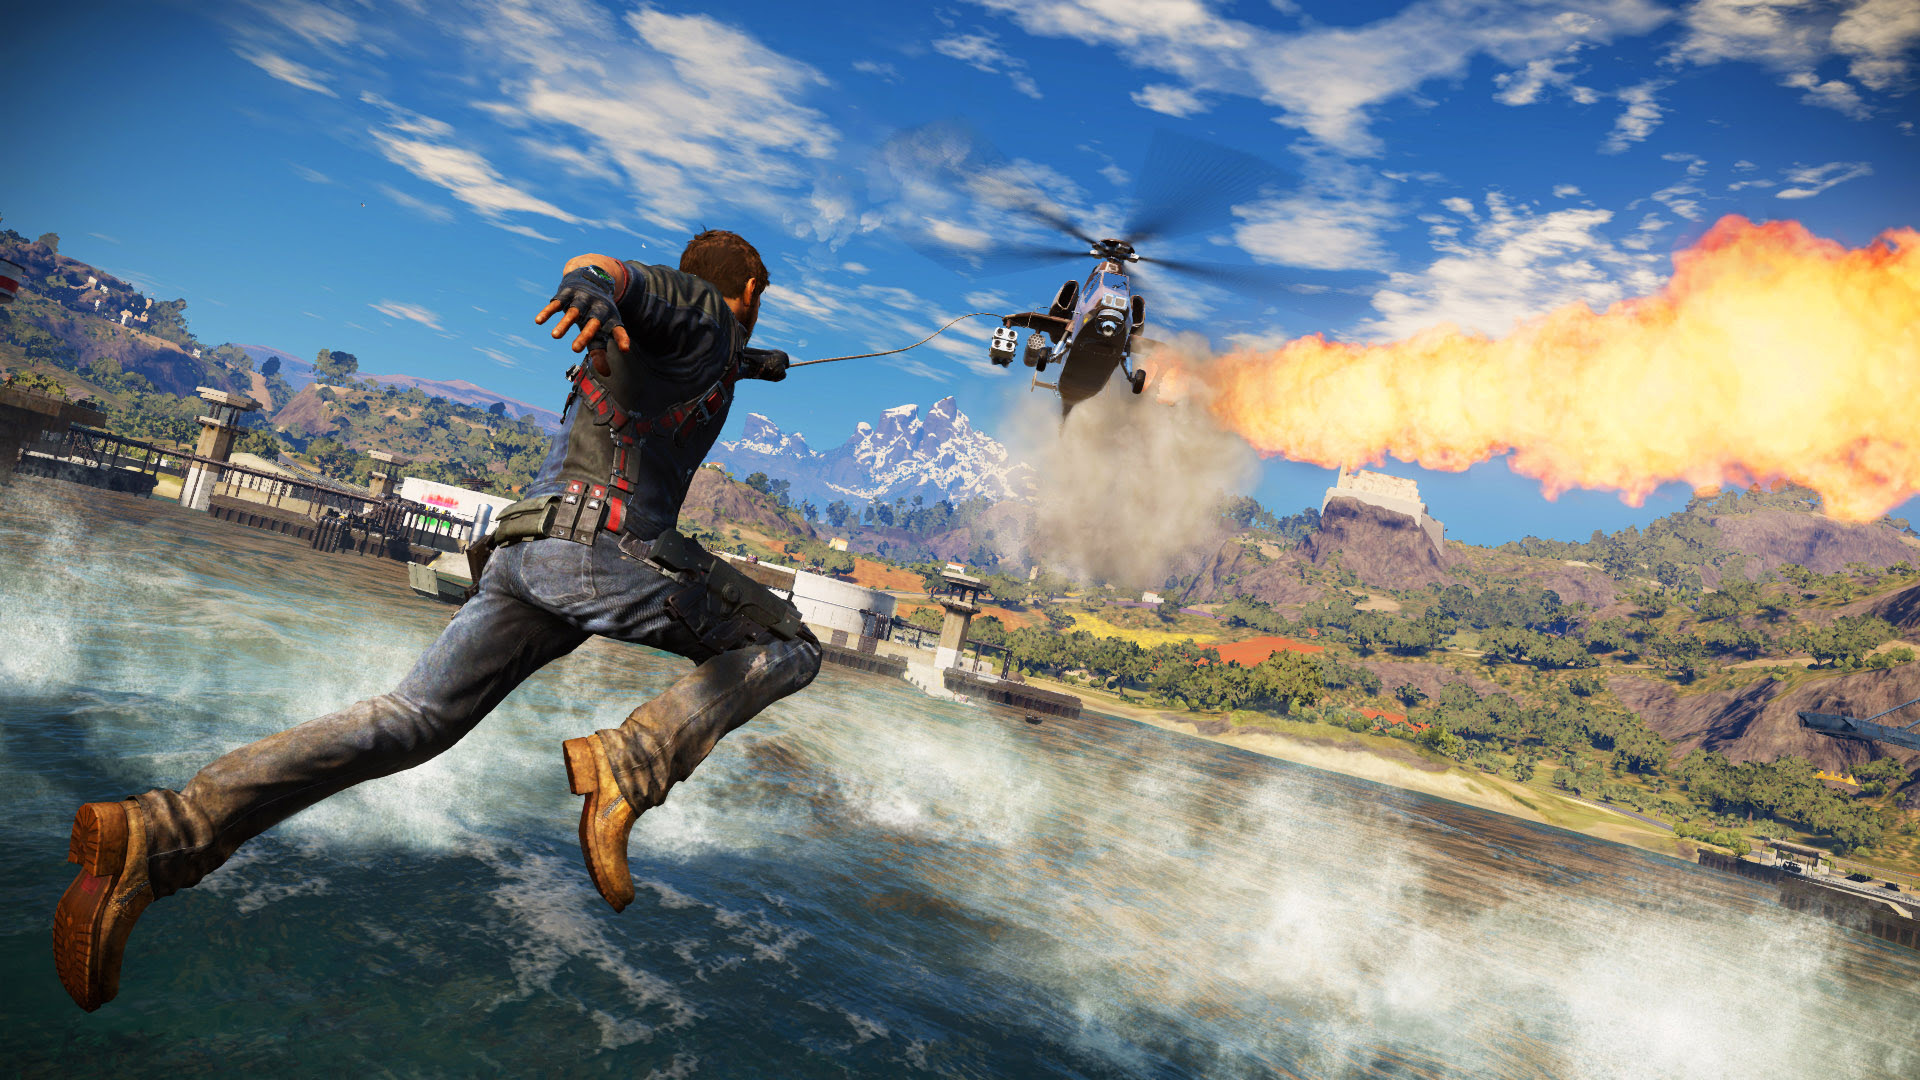 Game review, Just Cause 3, Explosive gameplay, Open-world action, 1920x1080 Full HD Desktop